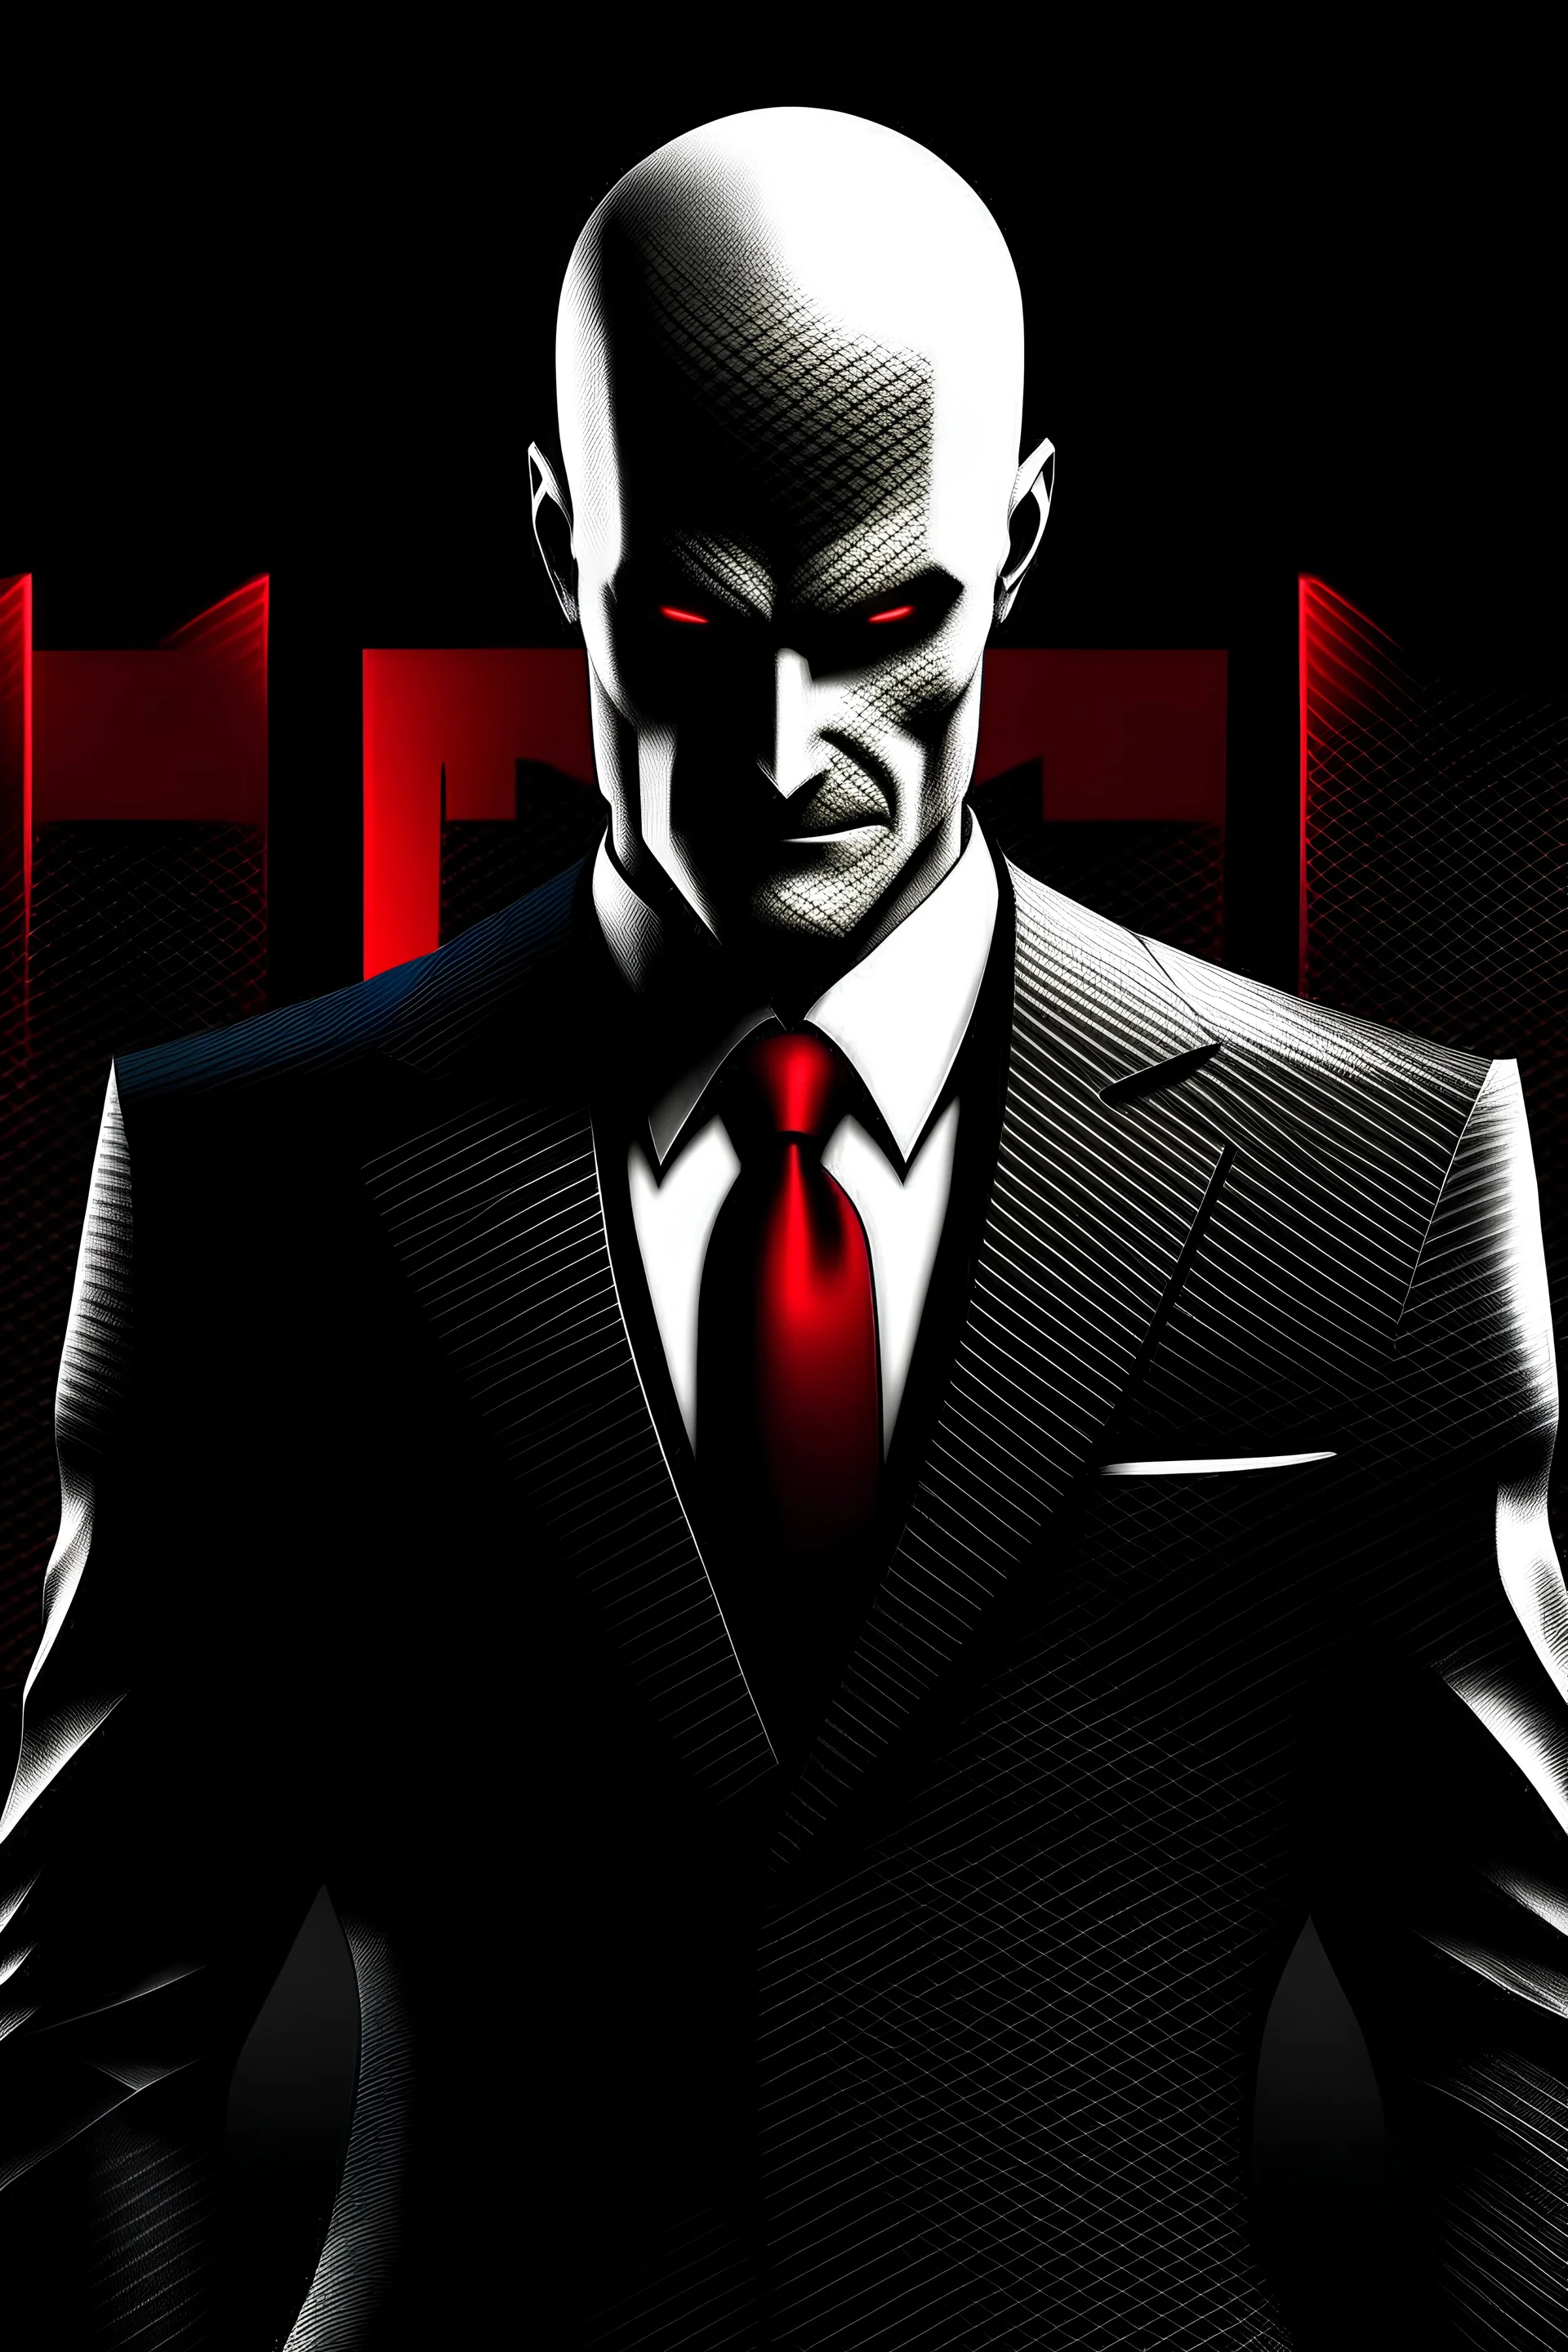 made a picture of Hitman with the word Hitman